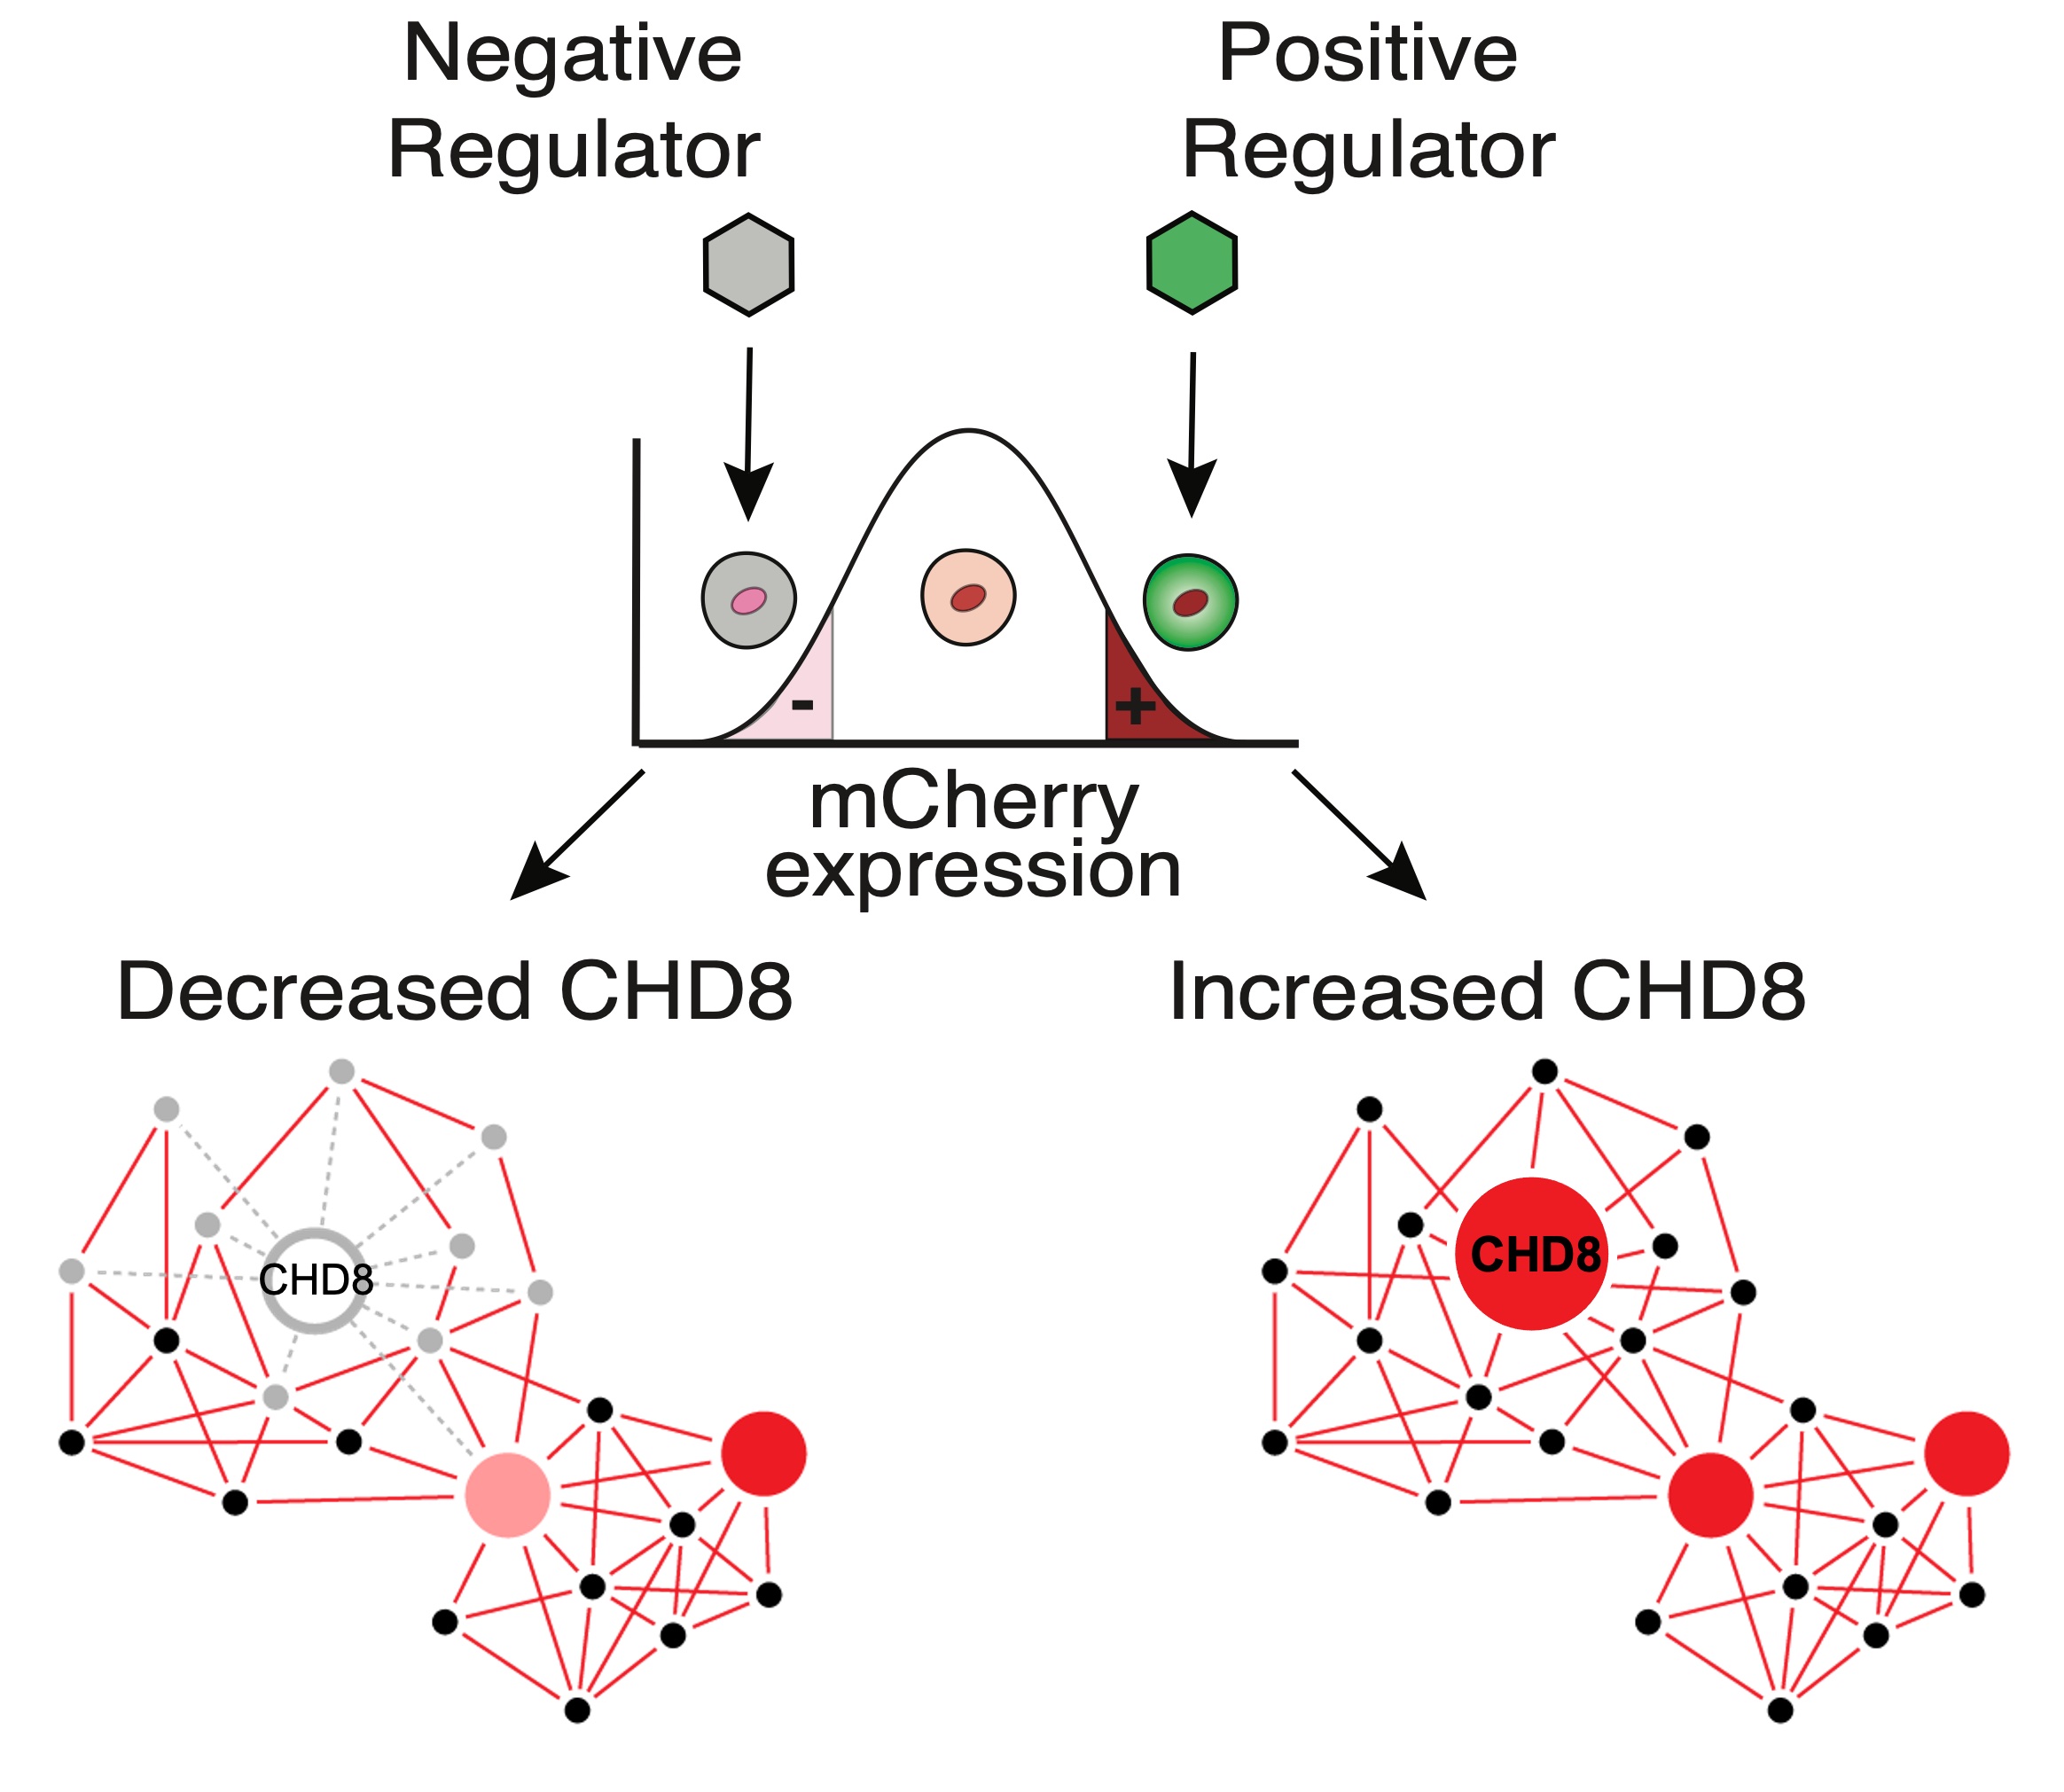 experimental
                        outline to determine compounds that increase or
                        decrease CHD8 expression in-vitro of human neural stem
                        cells (hNSCs) expressing an mCherry-tagged
                        CHD8 reporter